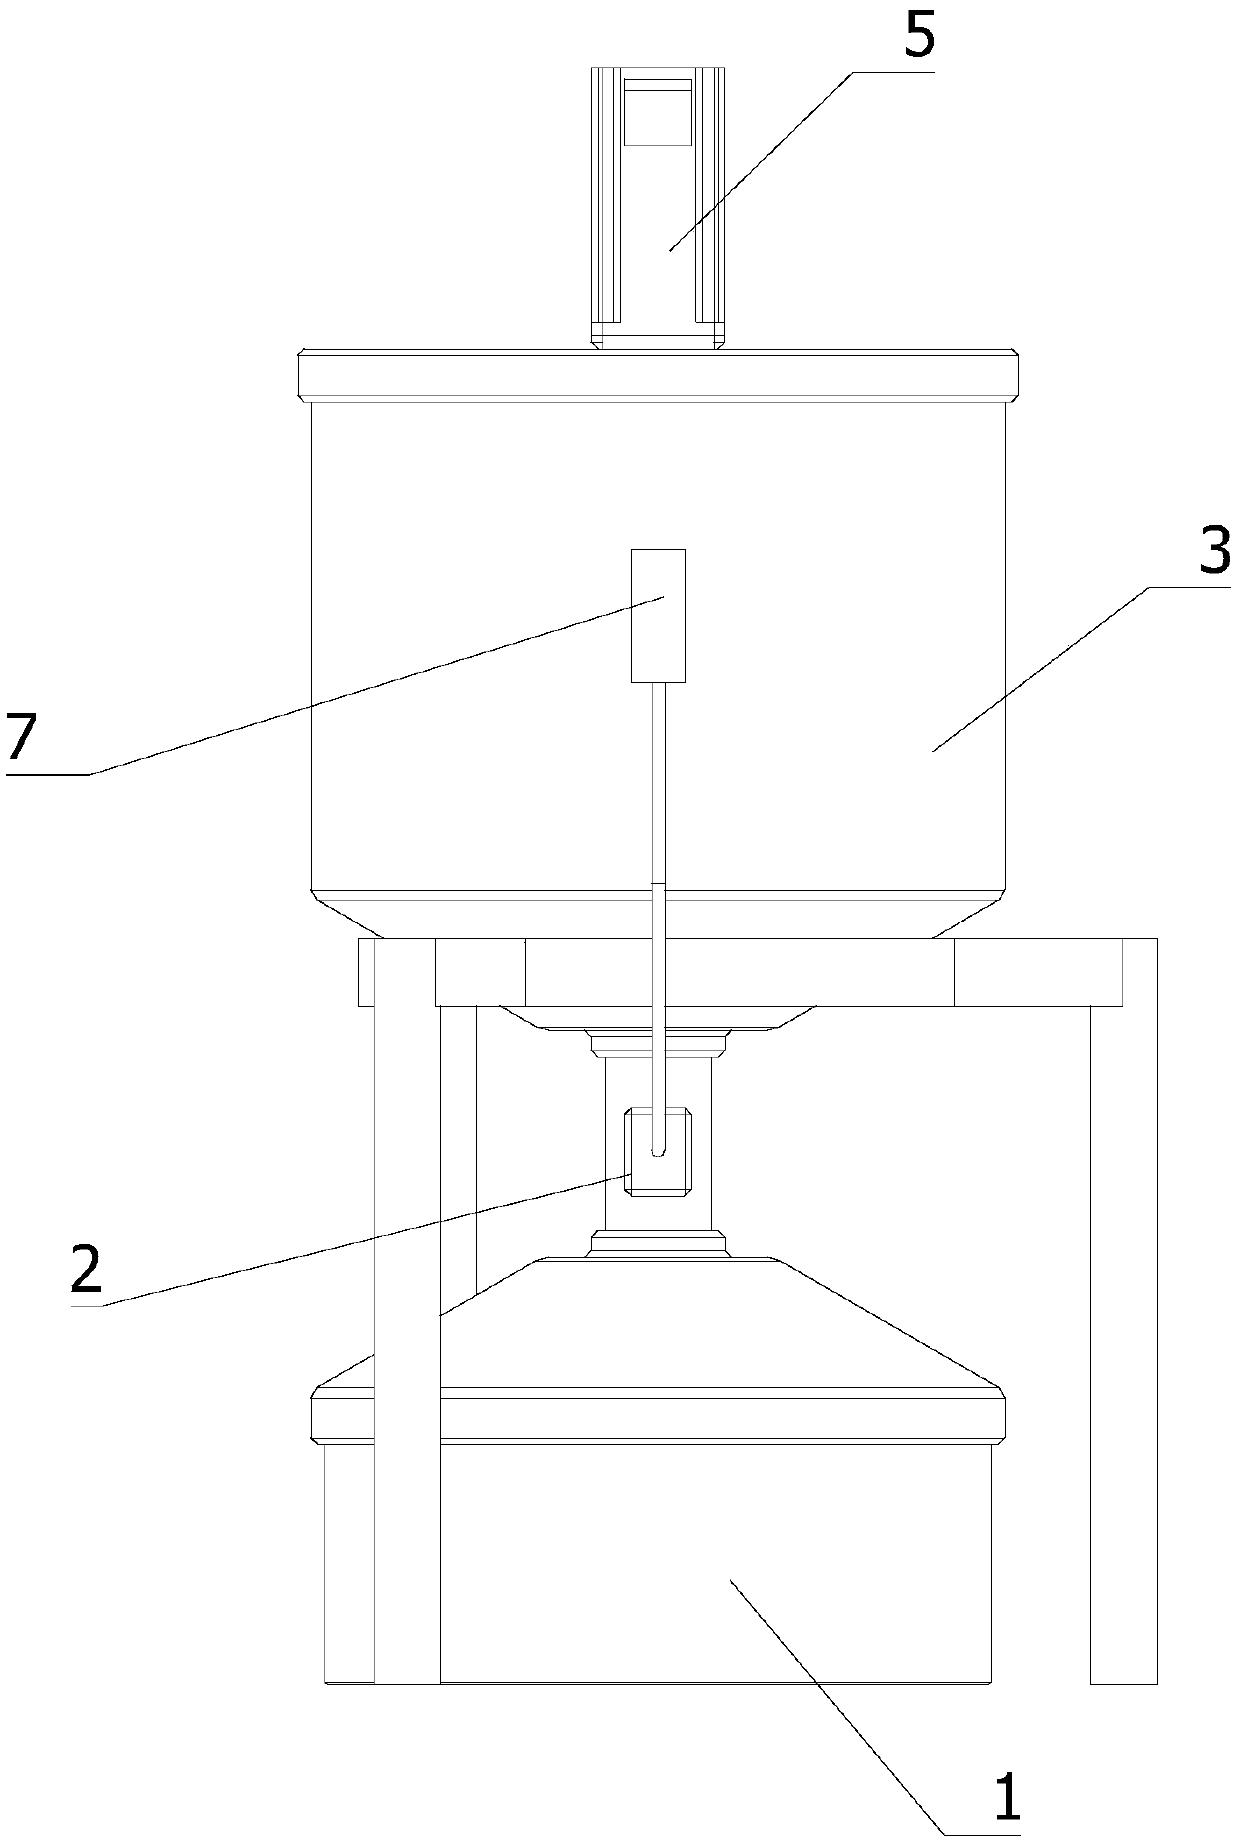 Low-pressure high-temperature steamer for holothurian processing